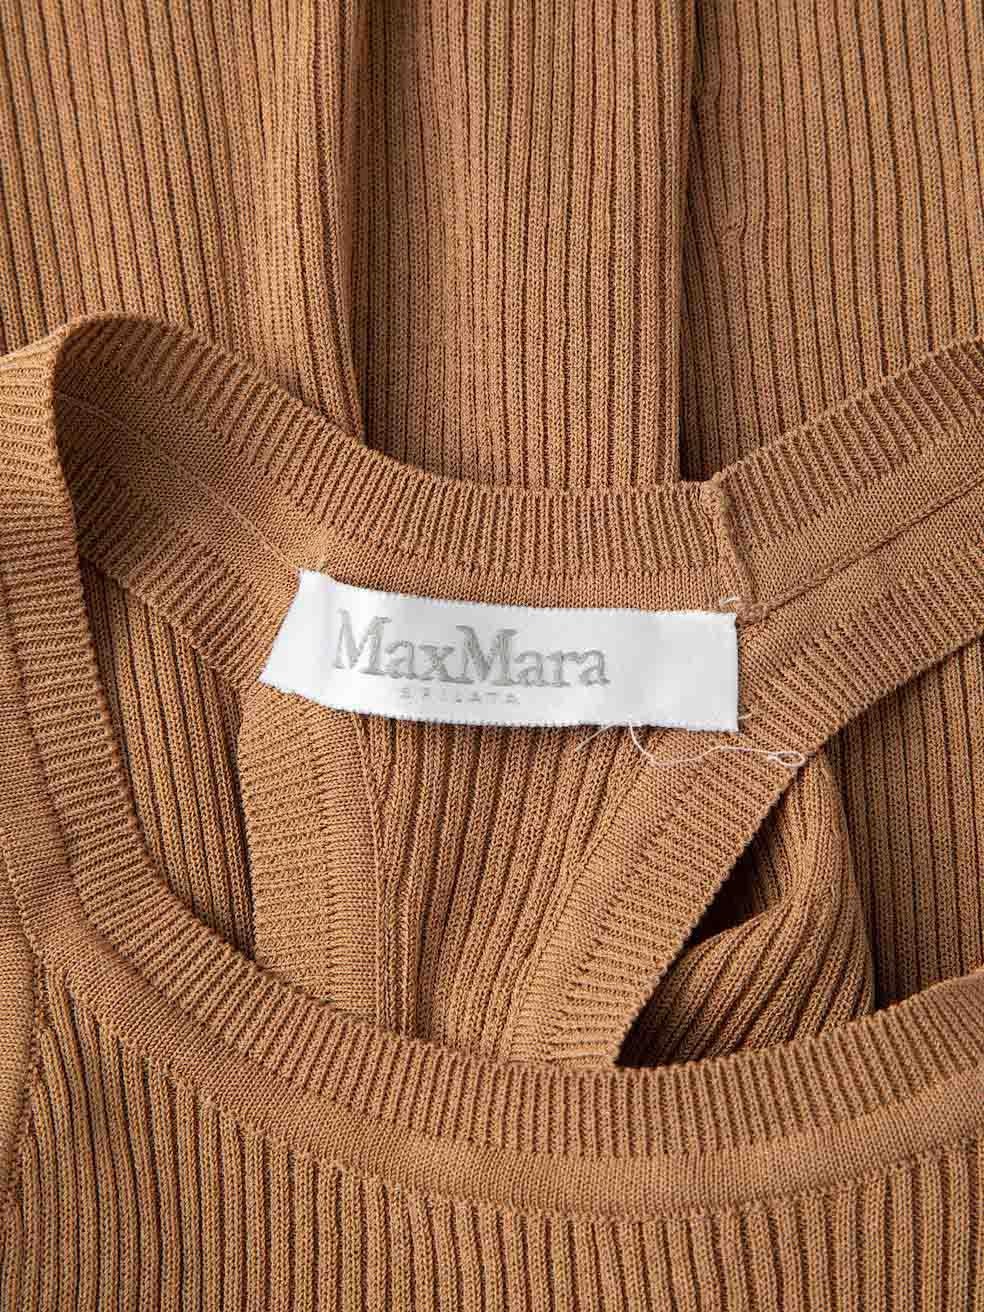 Max Mara Brown Seamless Ribbed Tank Top Size M For Sale 1